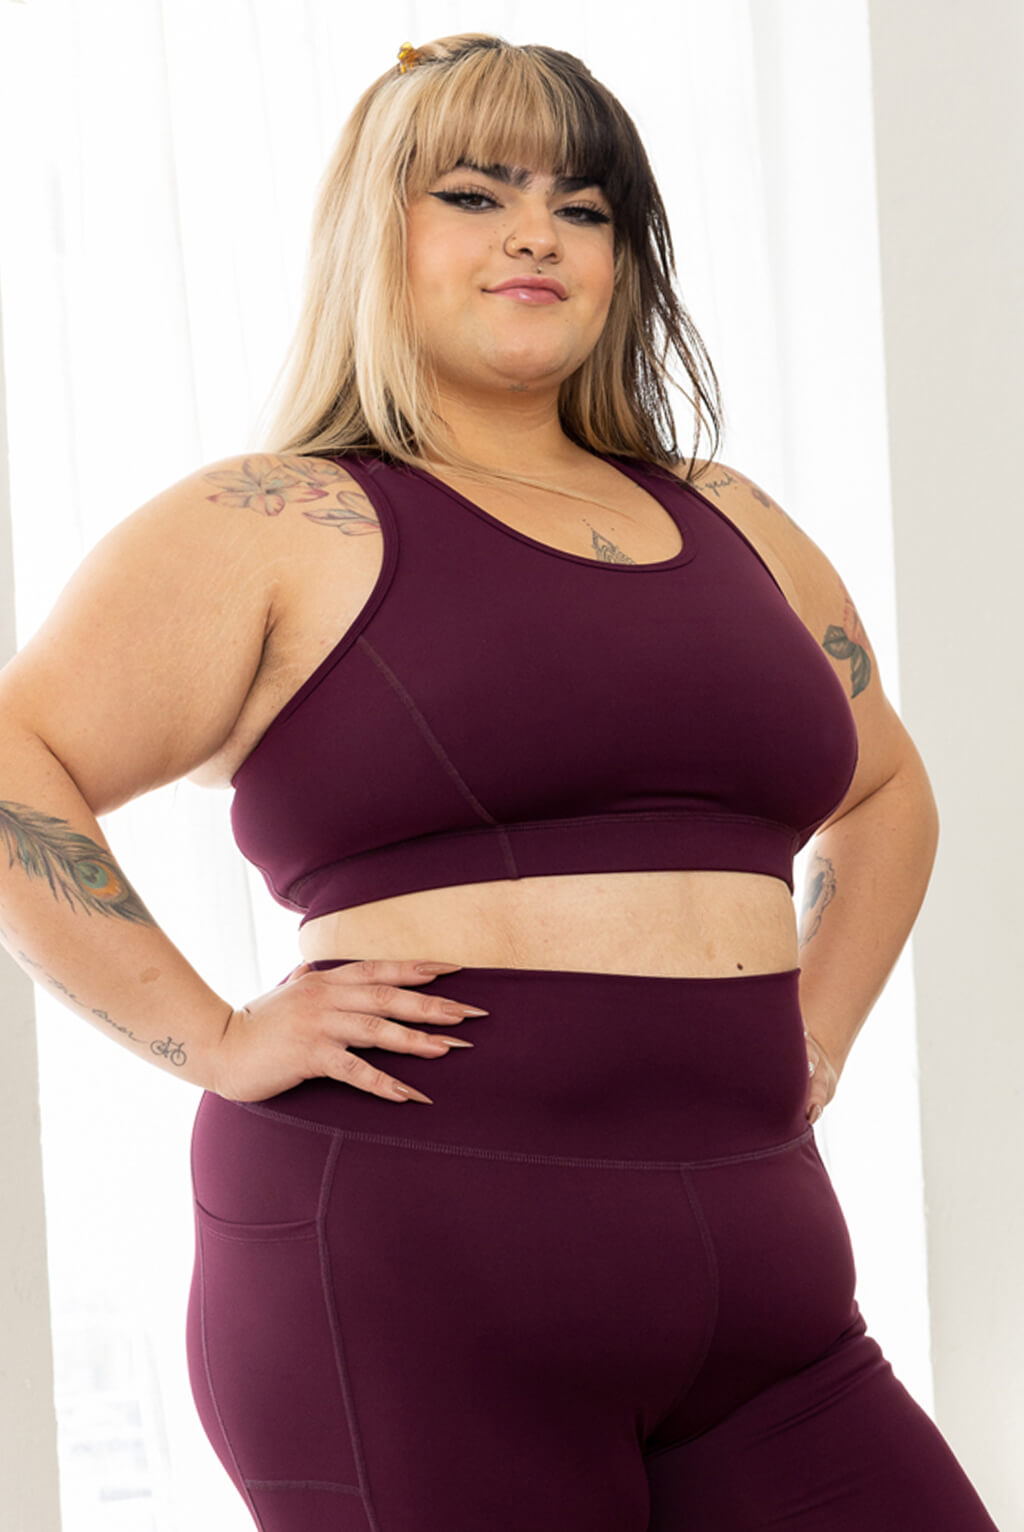 Plus Size Workout Sets in Plus Size Activewear